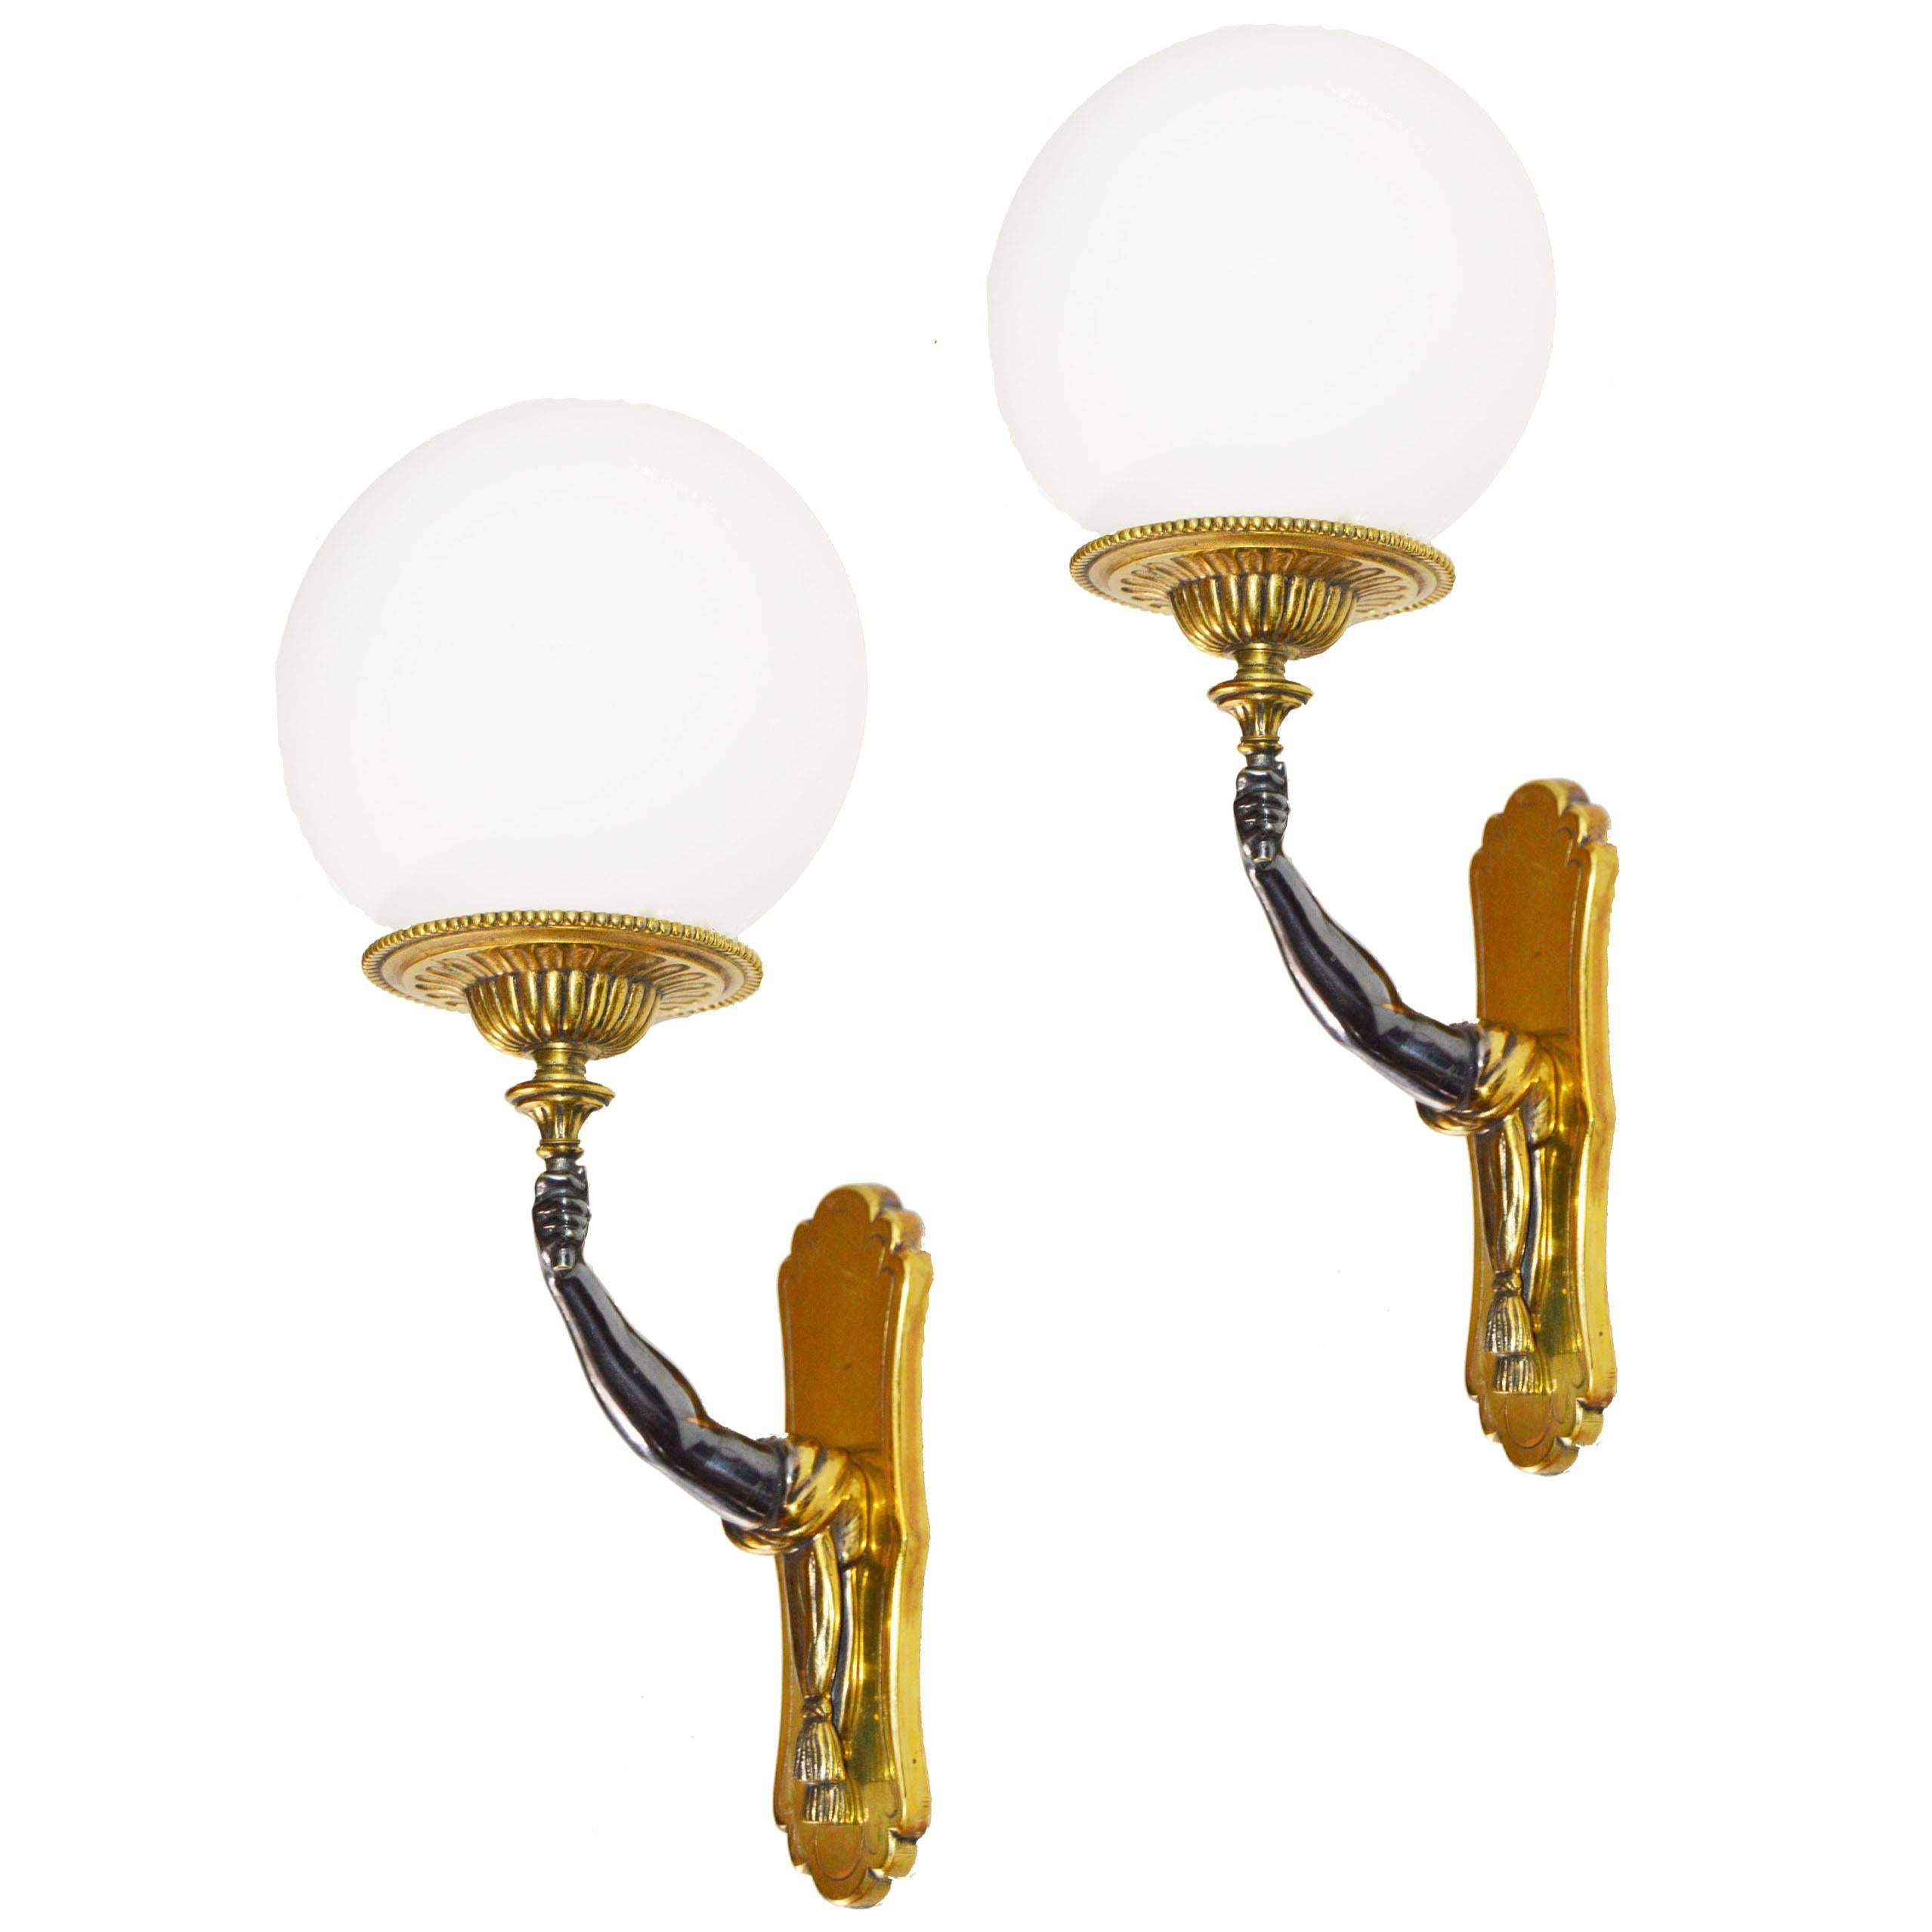 Maison Charles et Fils Pair of Sconces. 8 Sconces available. Priced by pair. For Sale